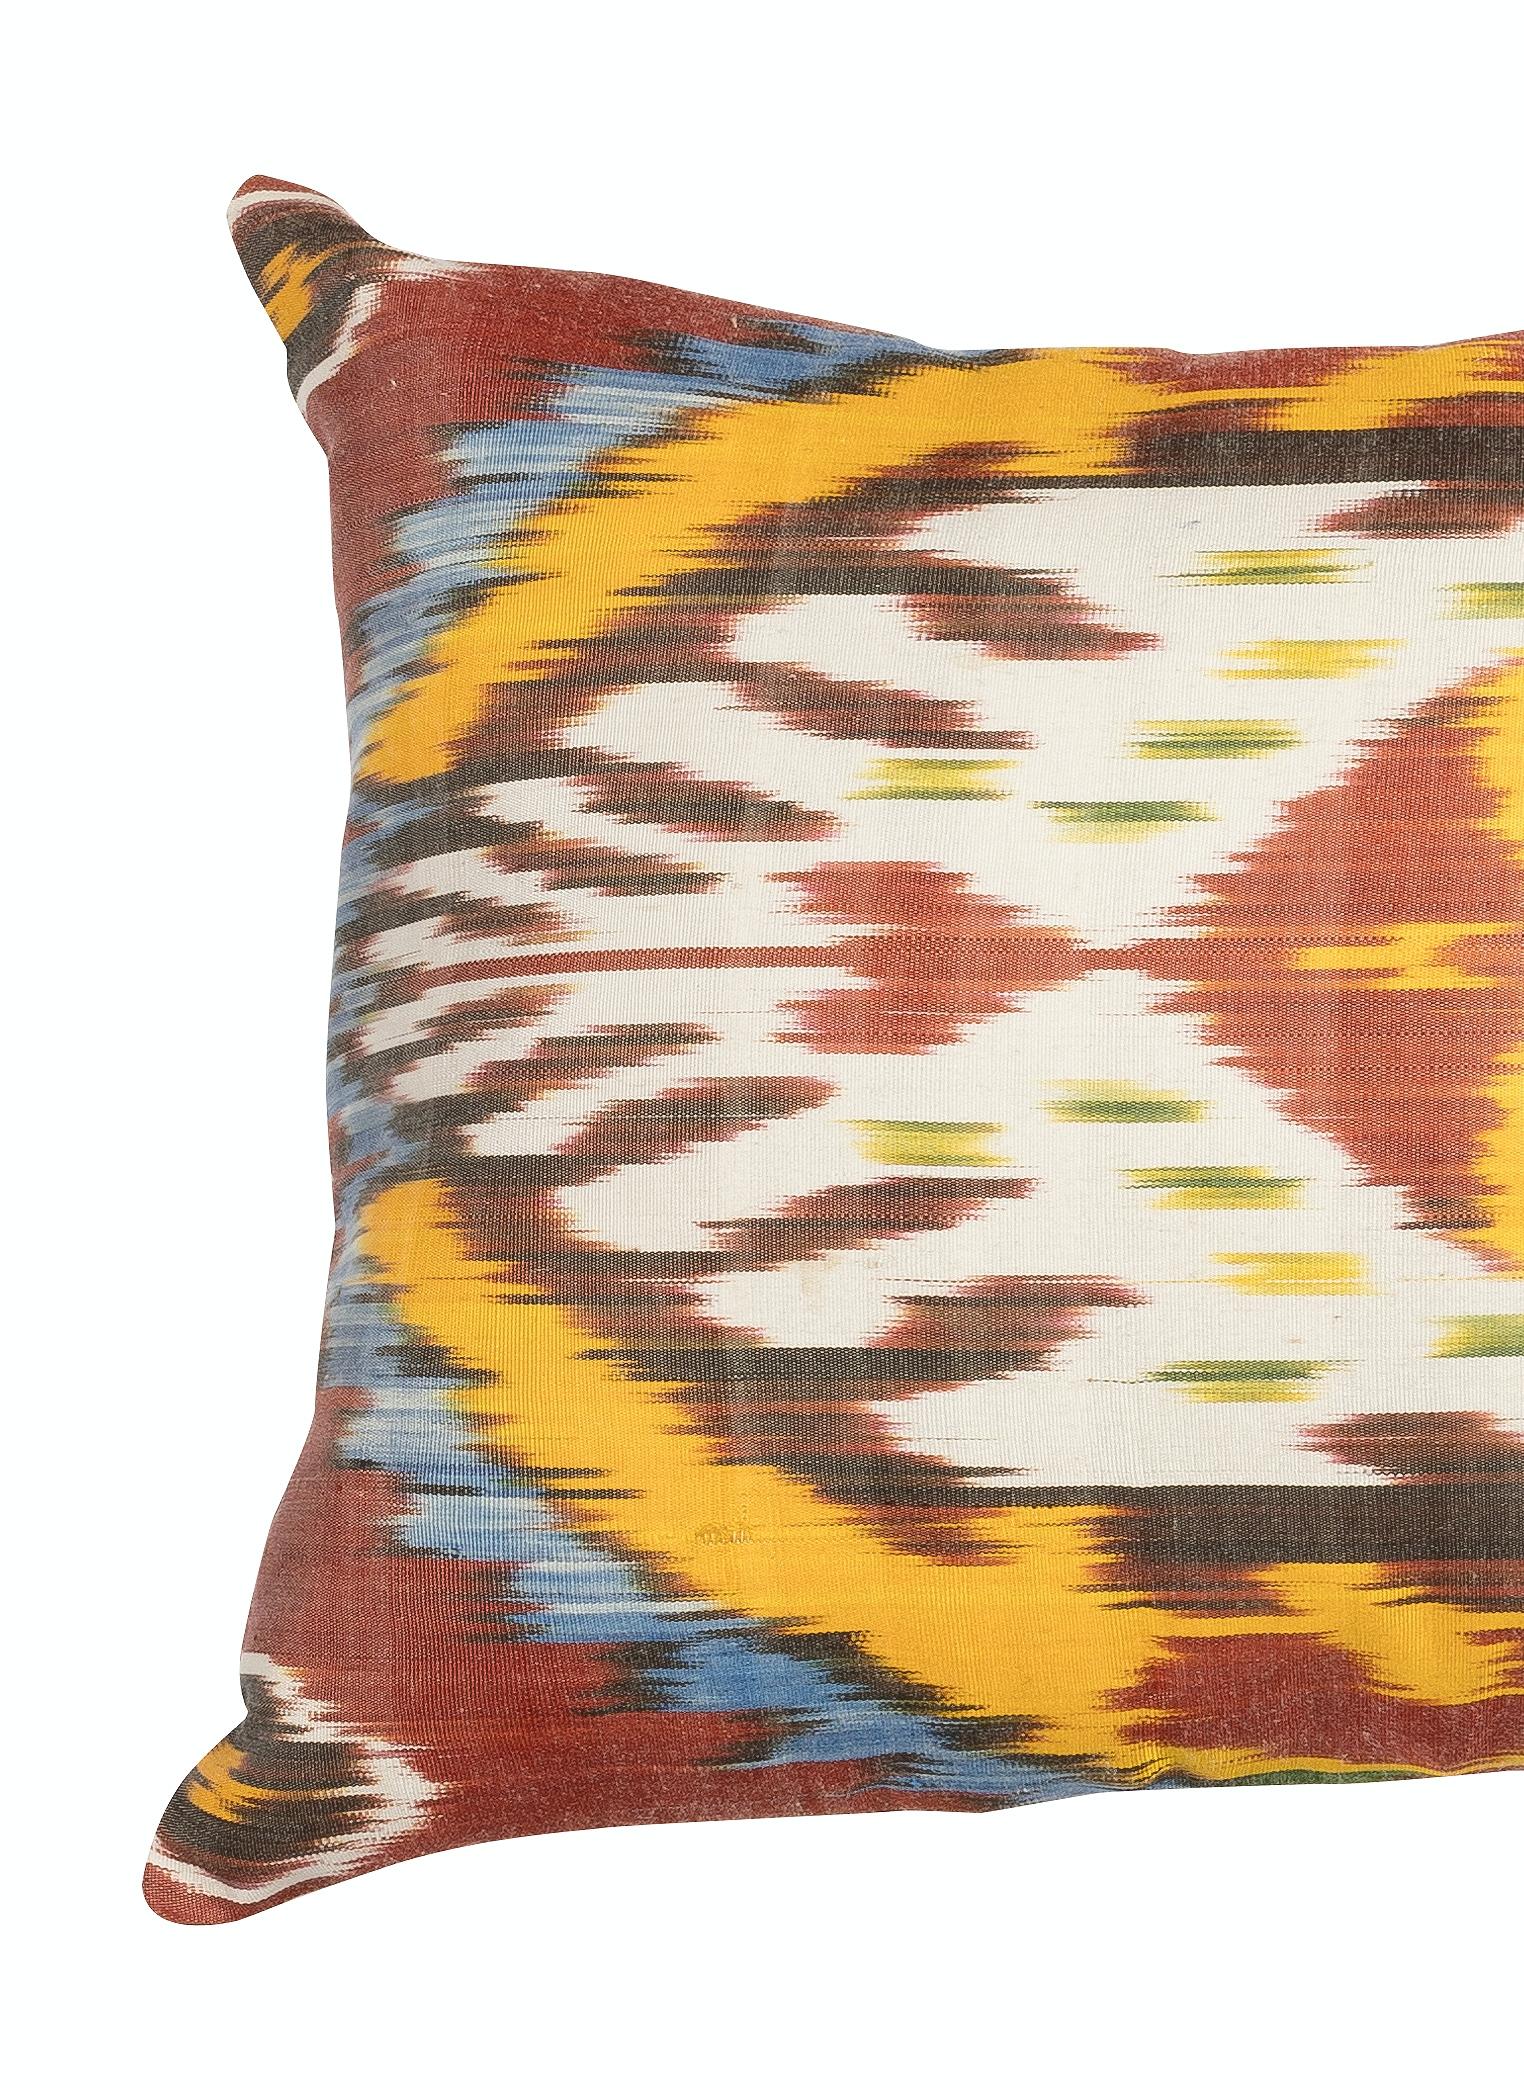 An ikat cushion cover is a special type of cushion cover that utilizes a traditional hand-woven fabric dyeing technique called ikat. The ikat technique involves pre-dyeing specific areas of the fabric with the desired design, and then weaving them